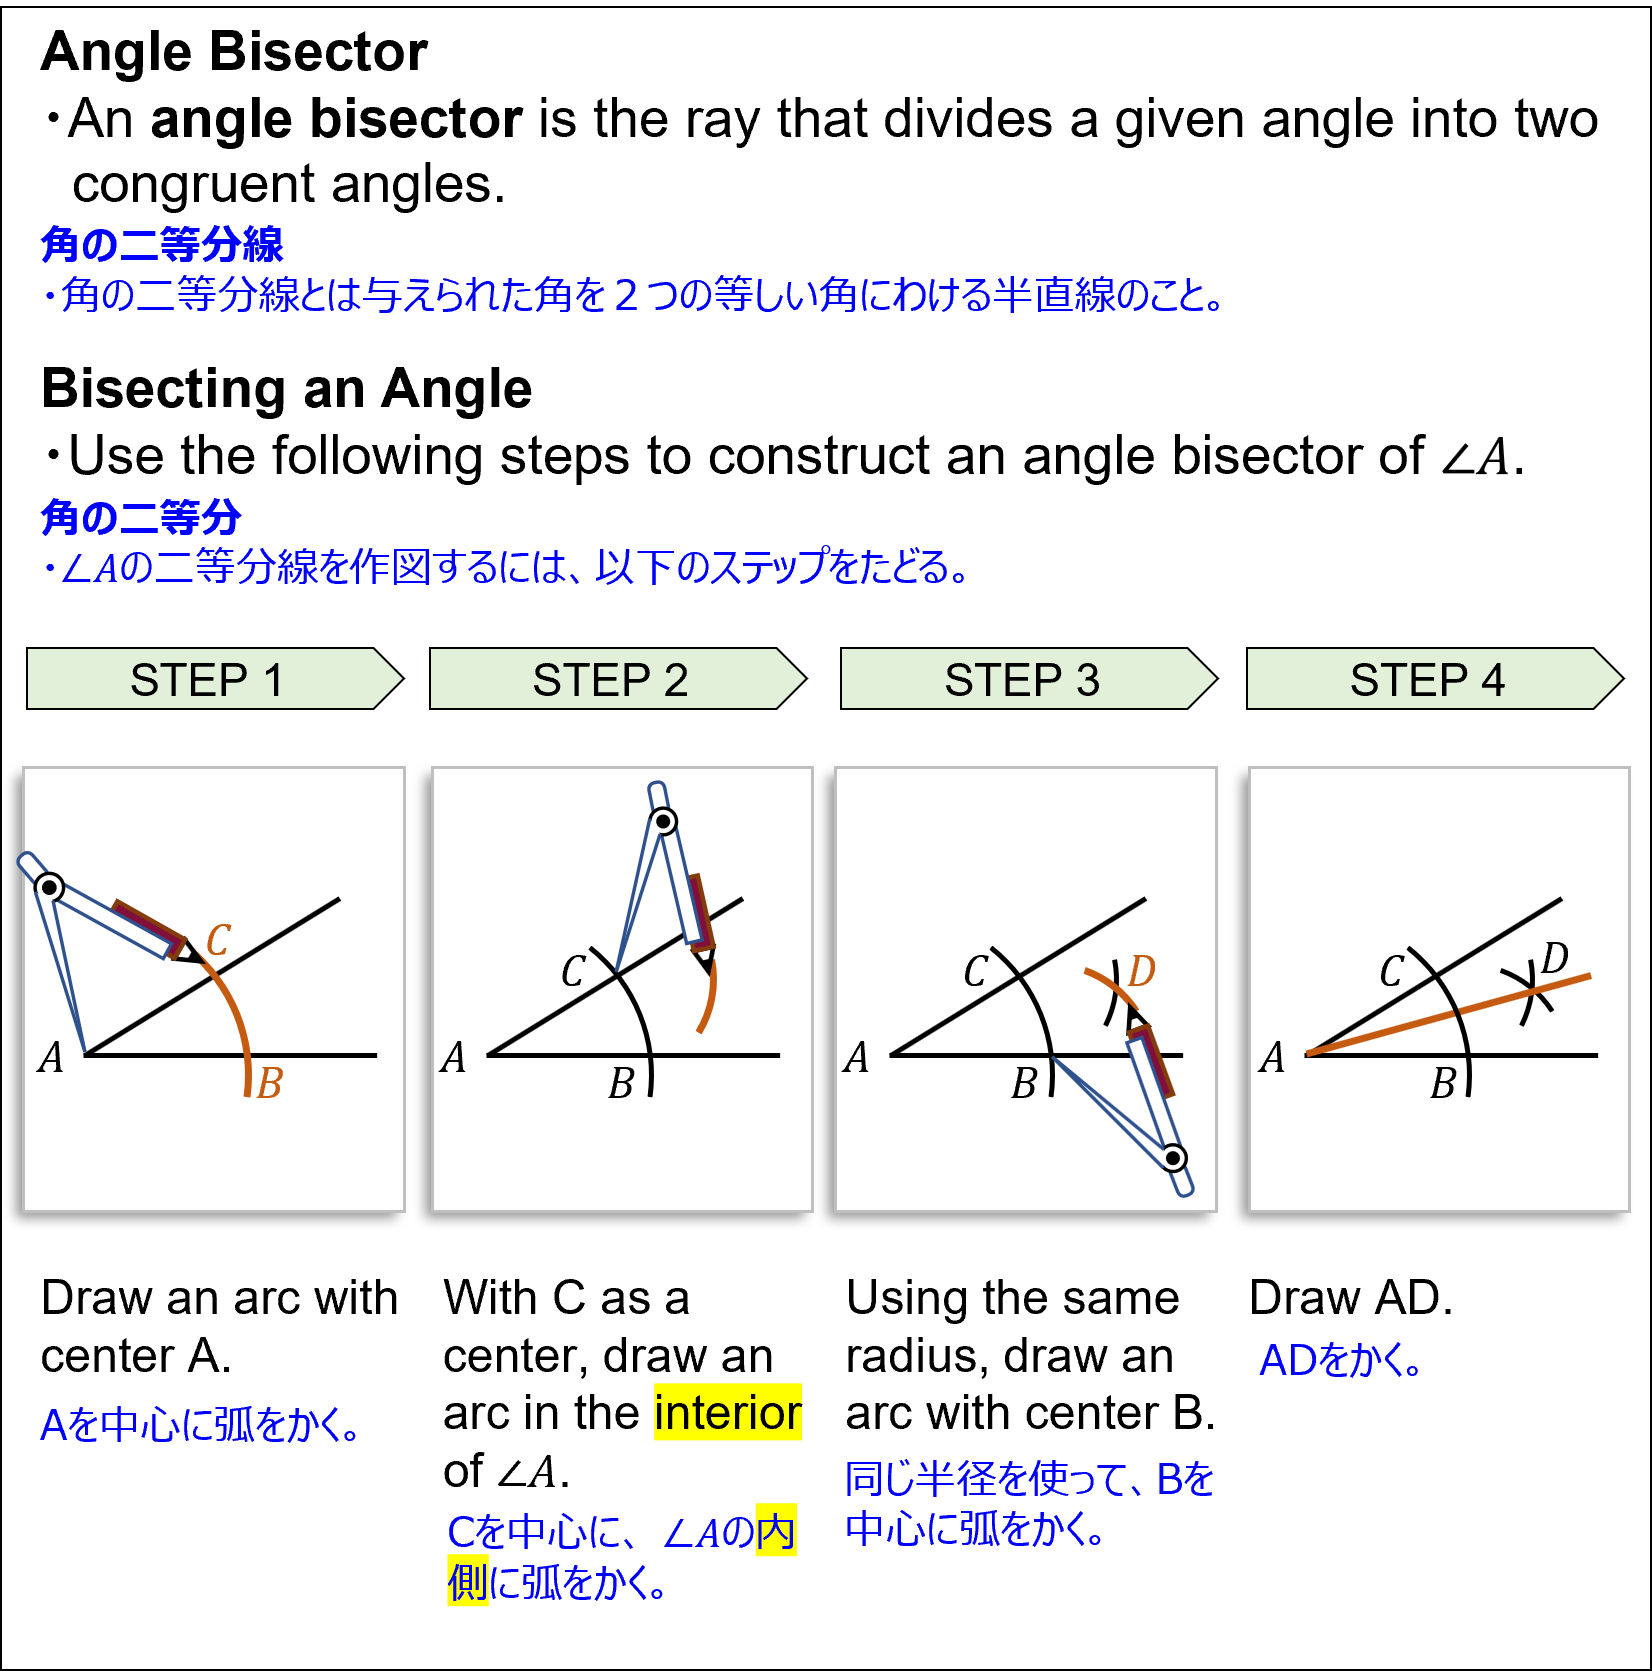 Illustrating how to construct an angle bisector